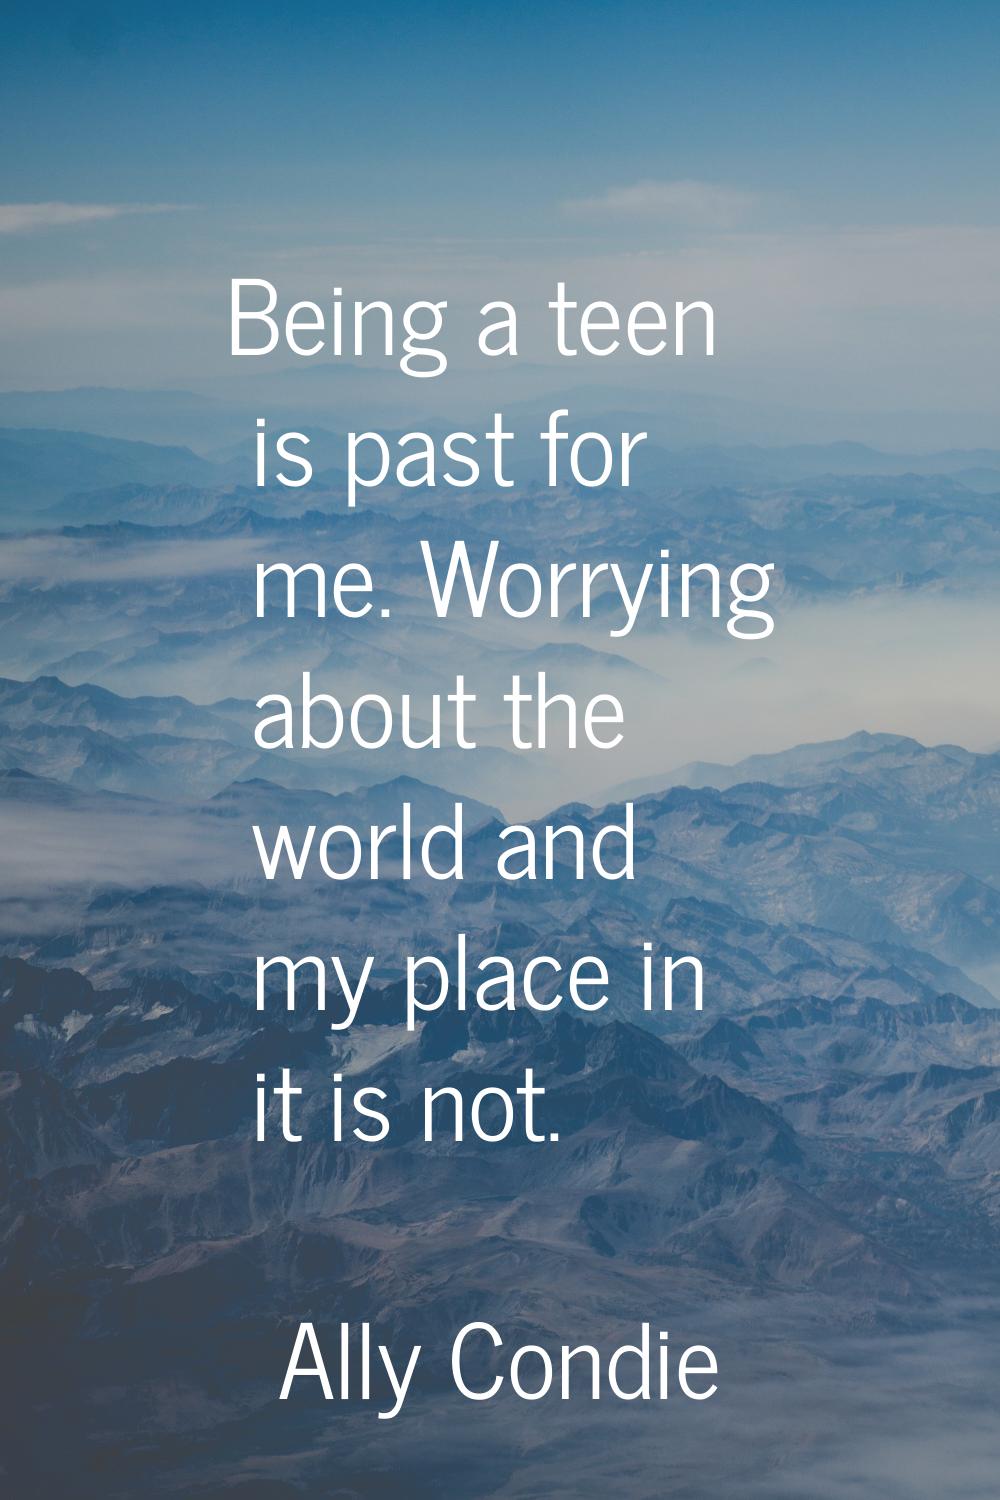 Being a teen is past for me. Worrying about the world and my place in it is not.